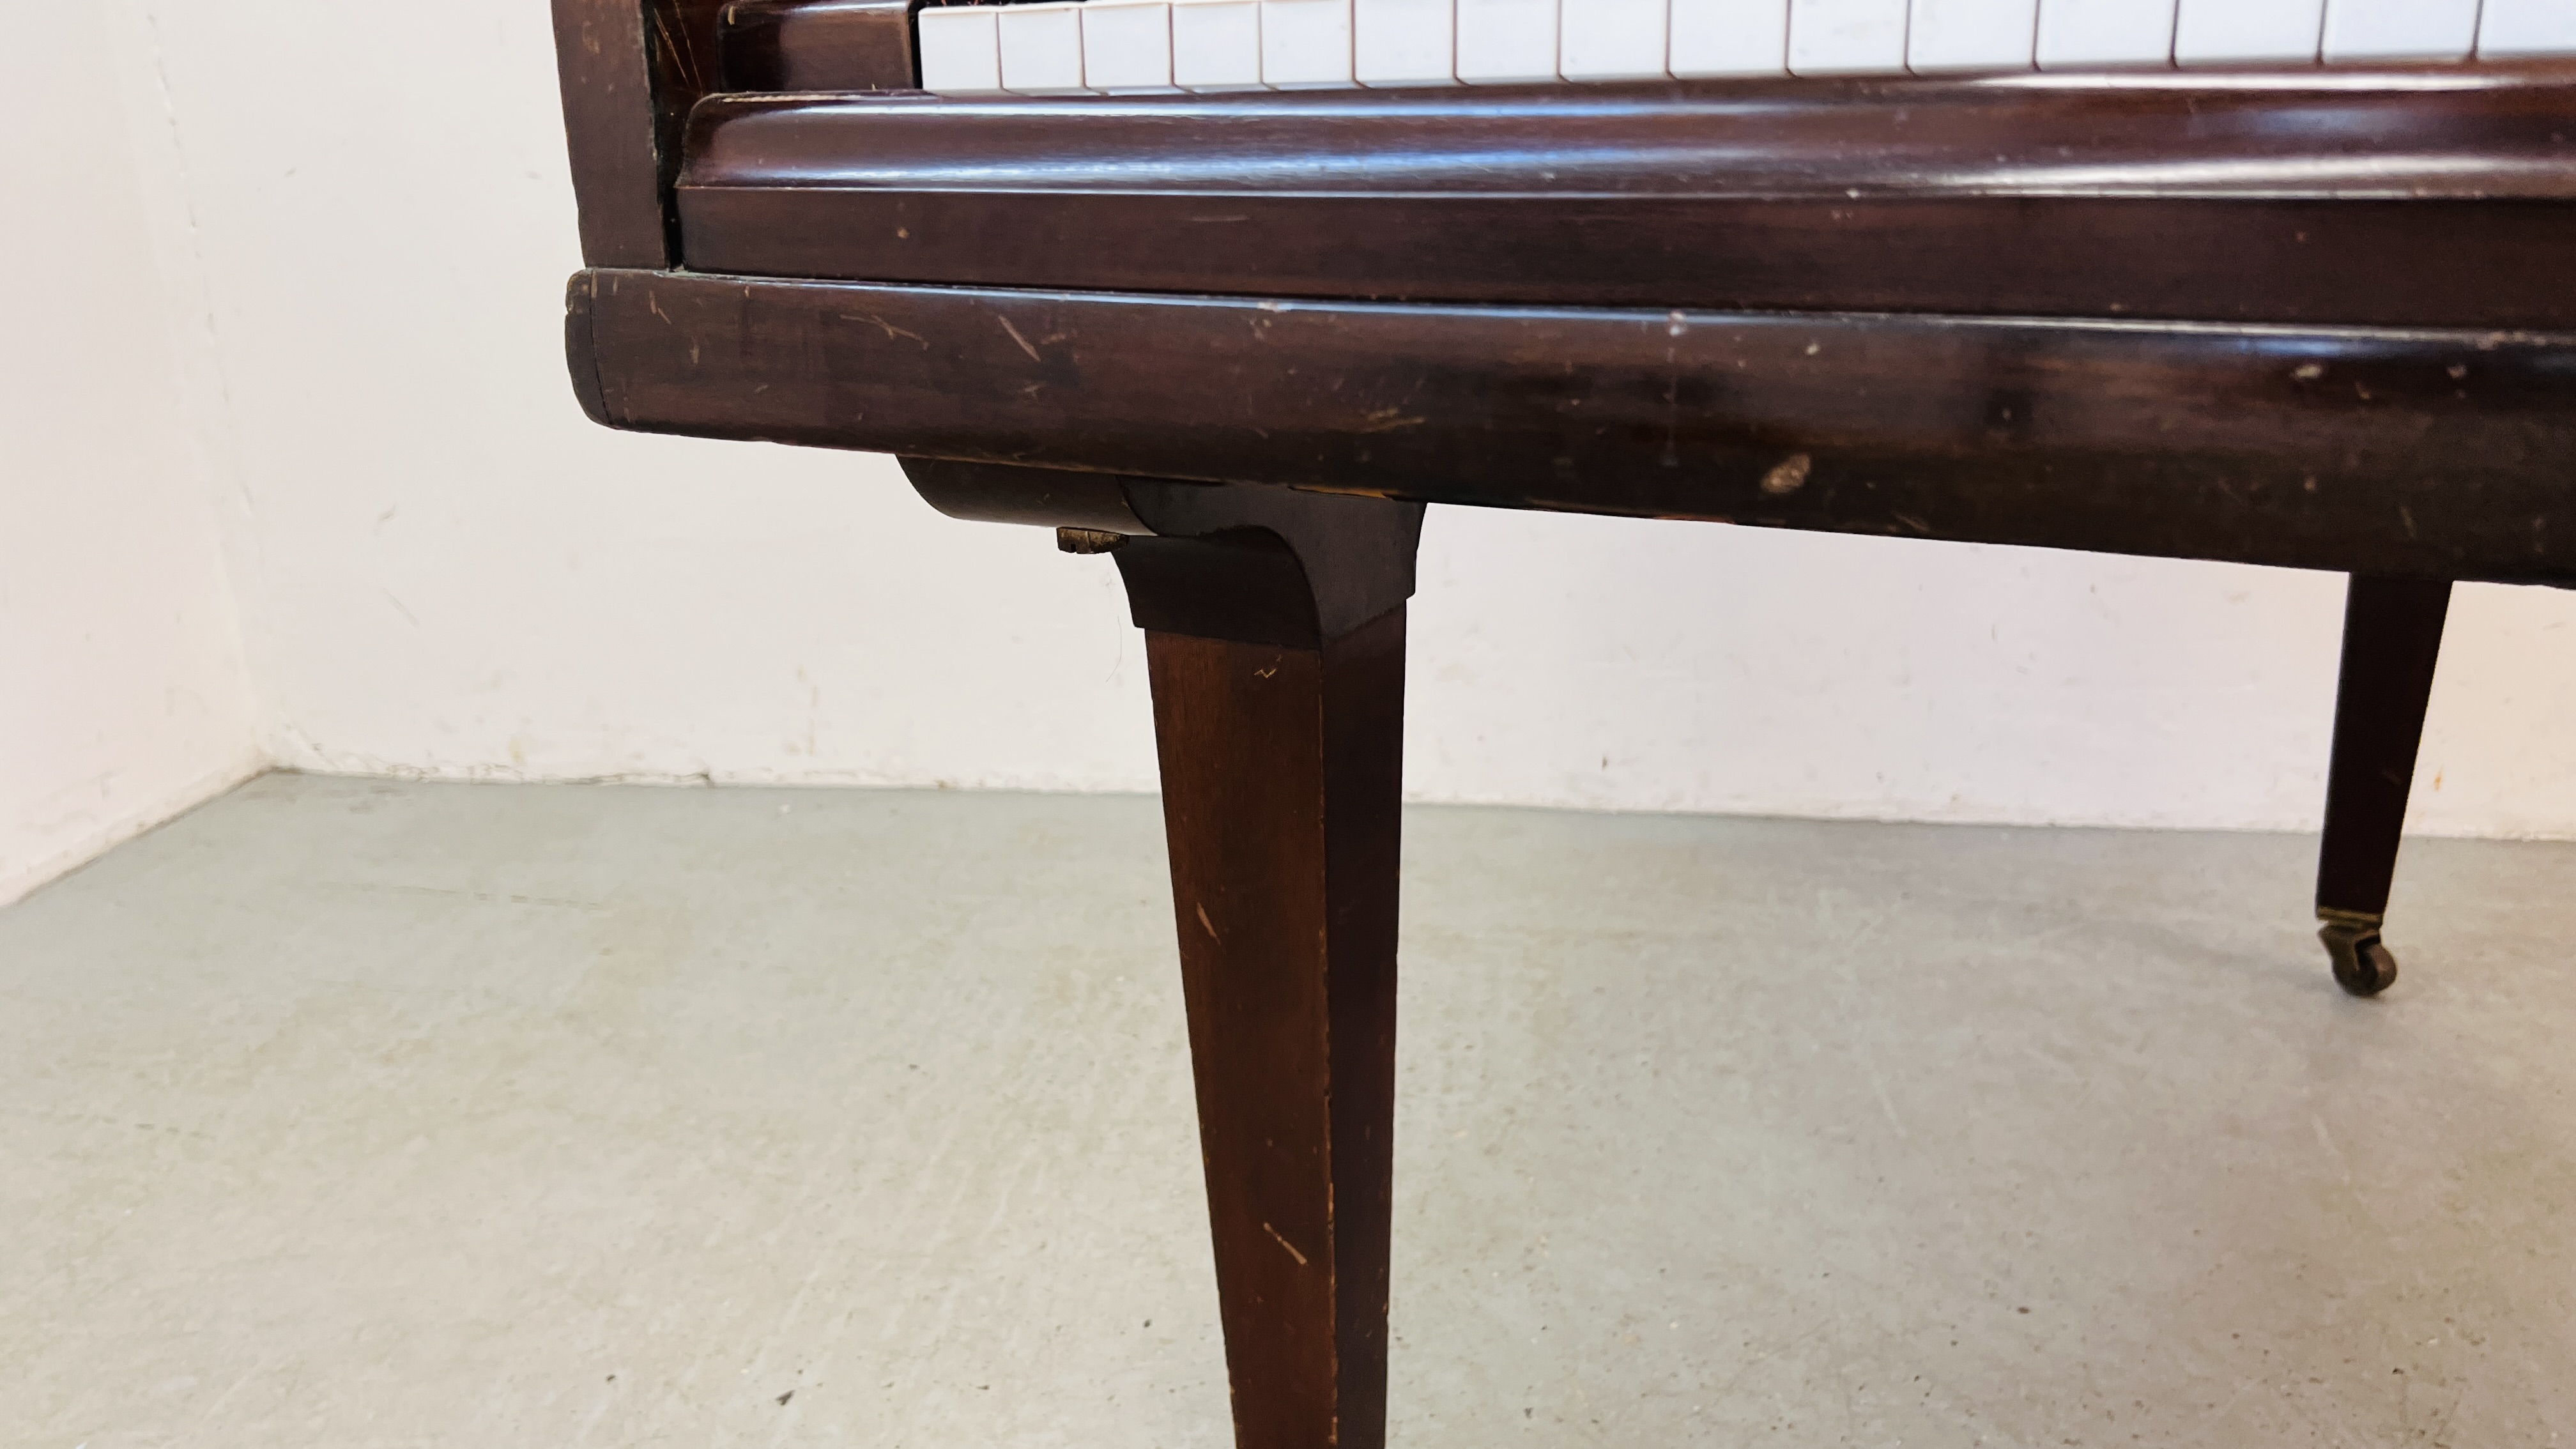 A REVAL BABY GRAND PIANO. - Image 11 of 20